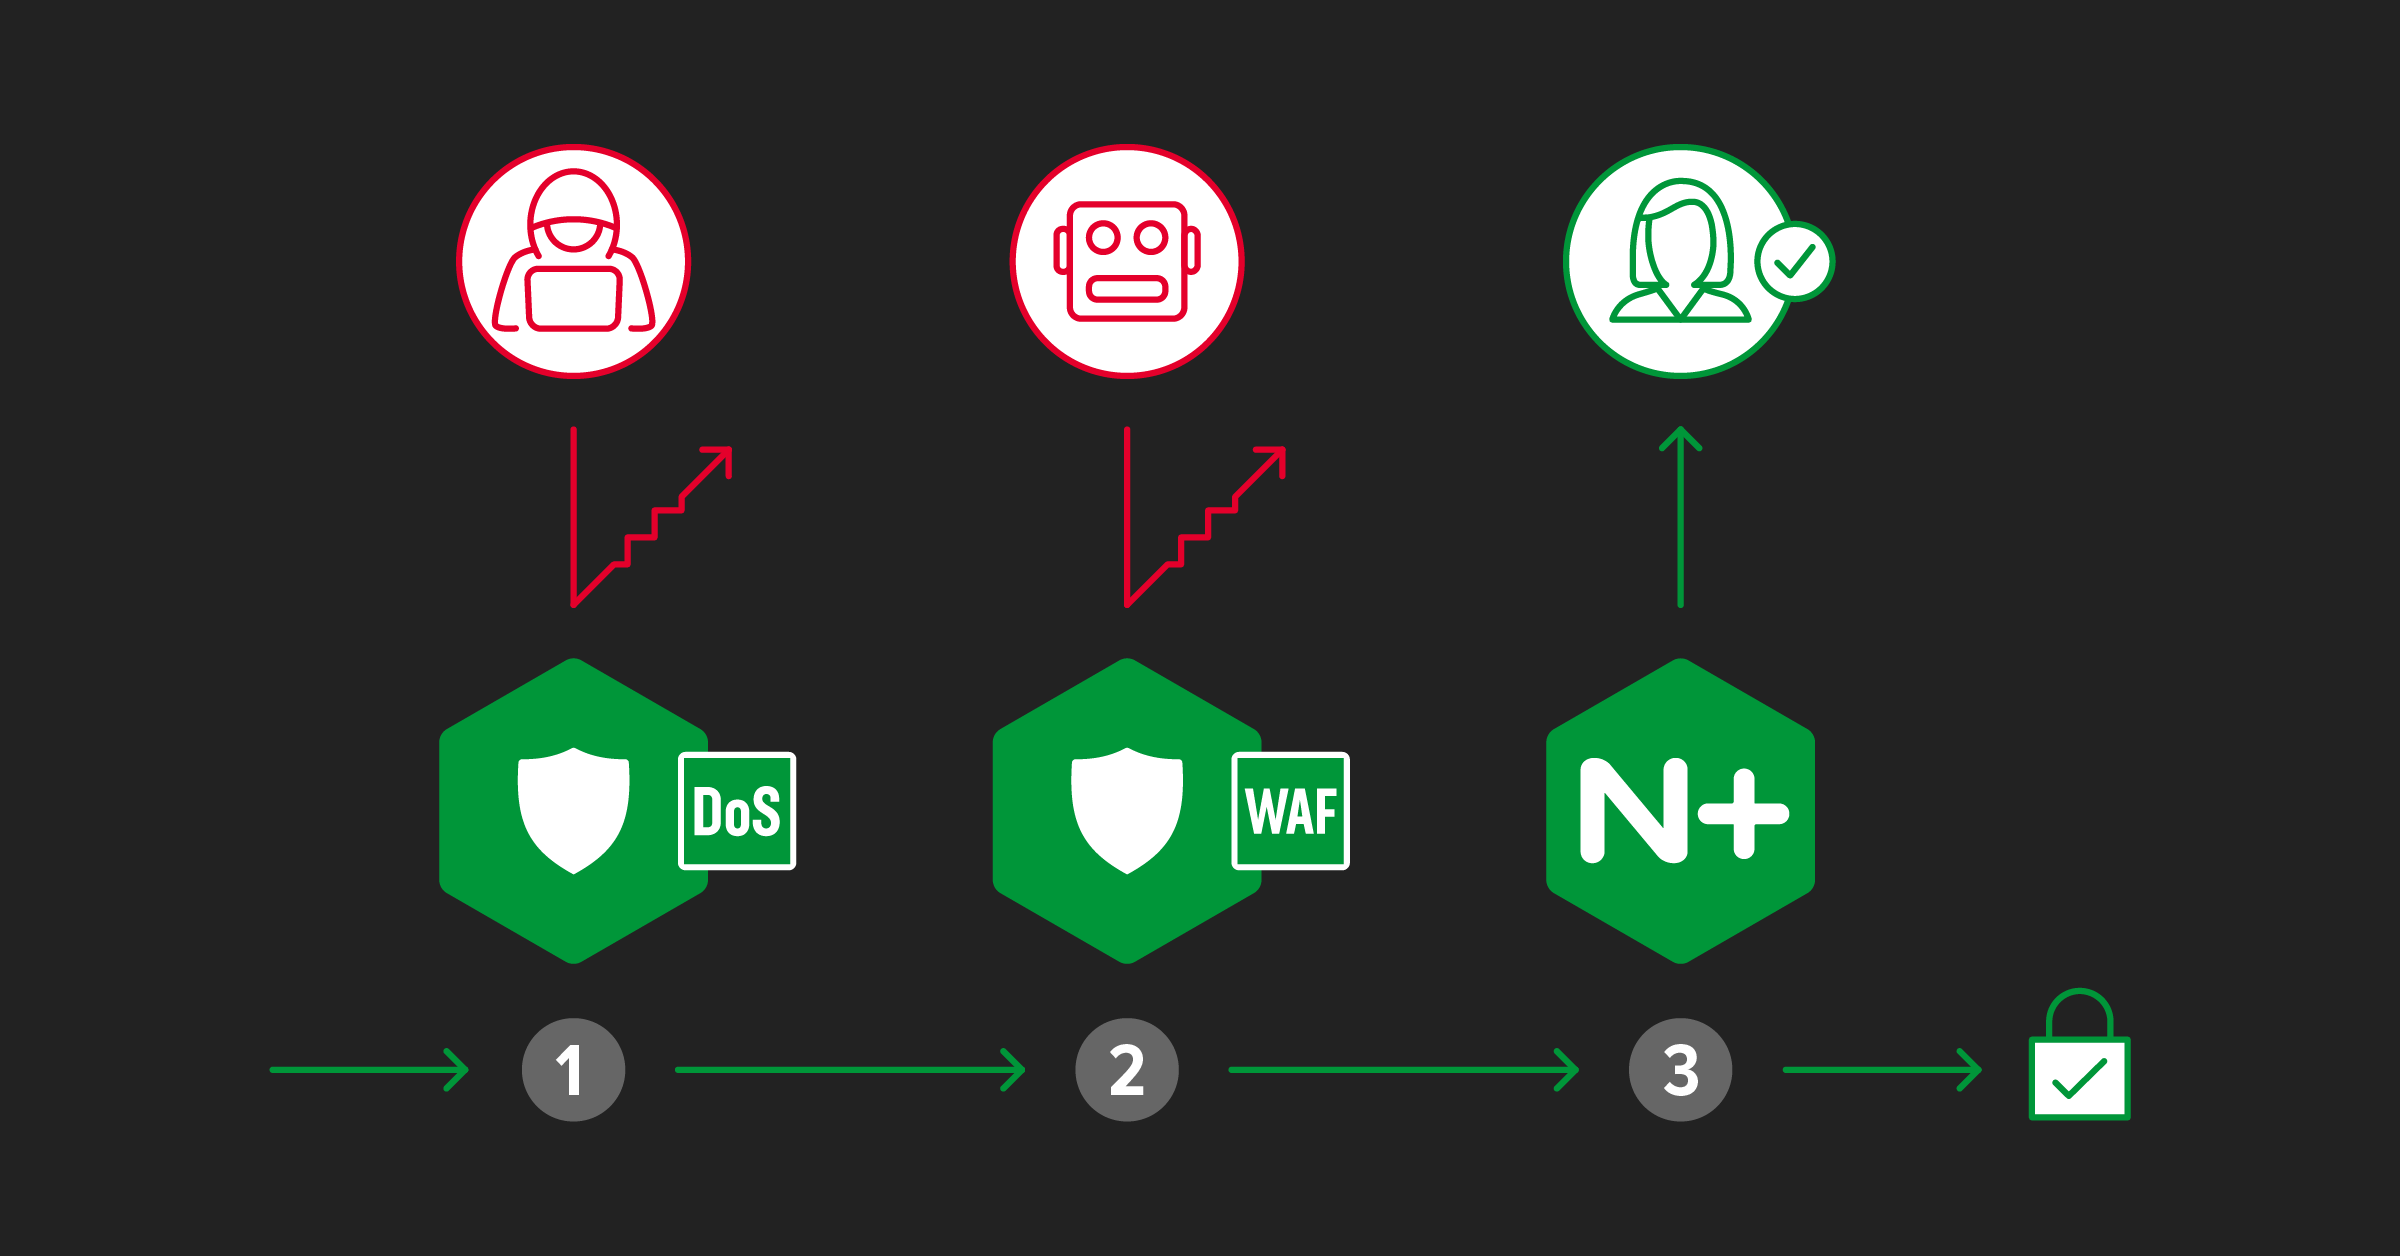 Diagram of three-phase security solution for efficient application traffic management to block illegitimate traffic and automate security, using NGINX App Protect DoS and WAF plus NGINX Plus